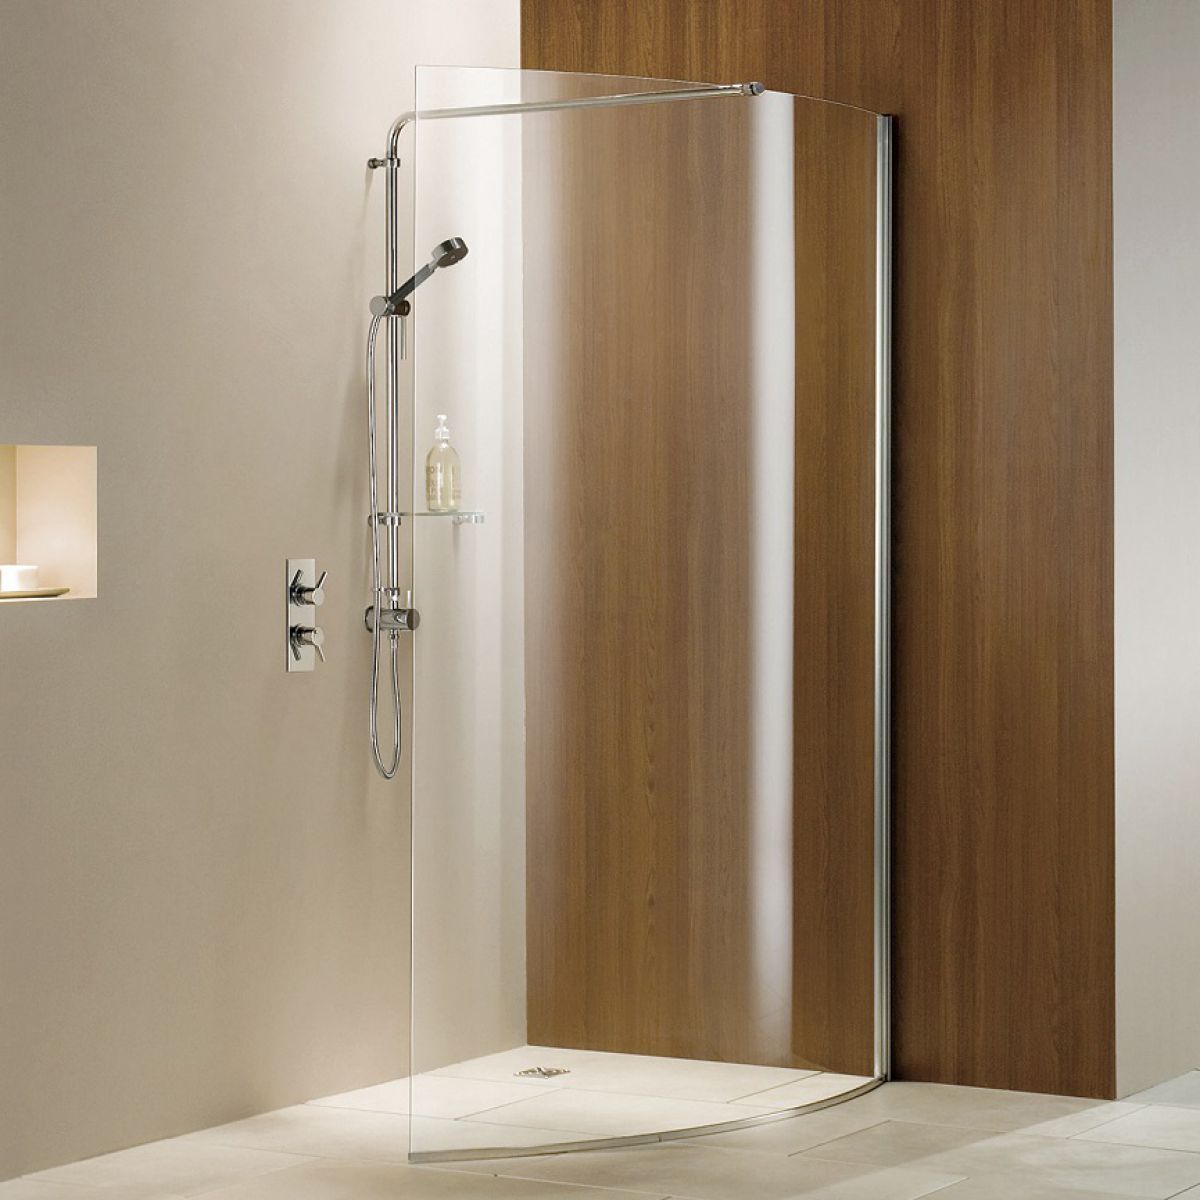 Curved glass shower screen panel by Matki